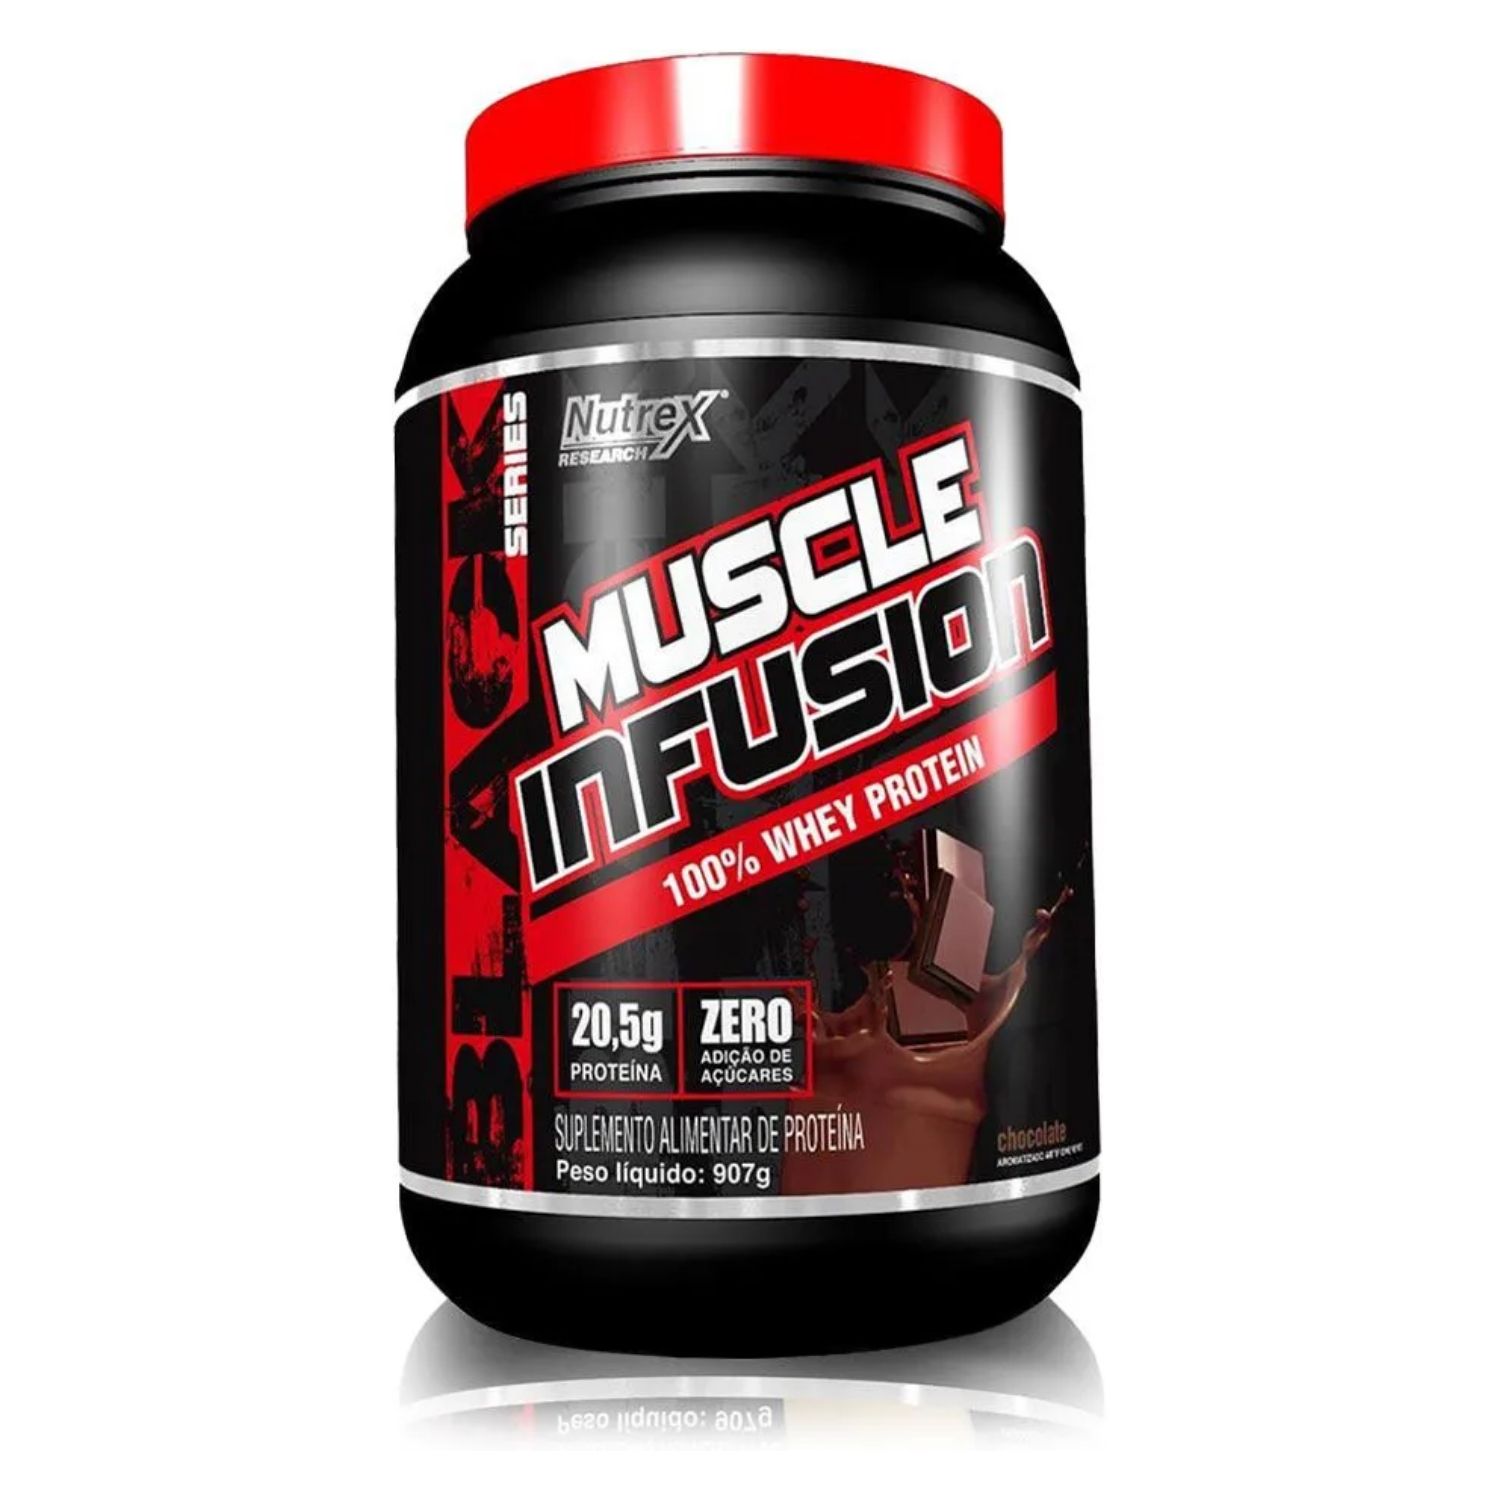 100% Whey Protein Muscle Infusion 907g Nutrex